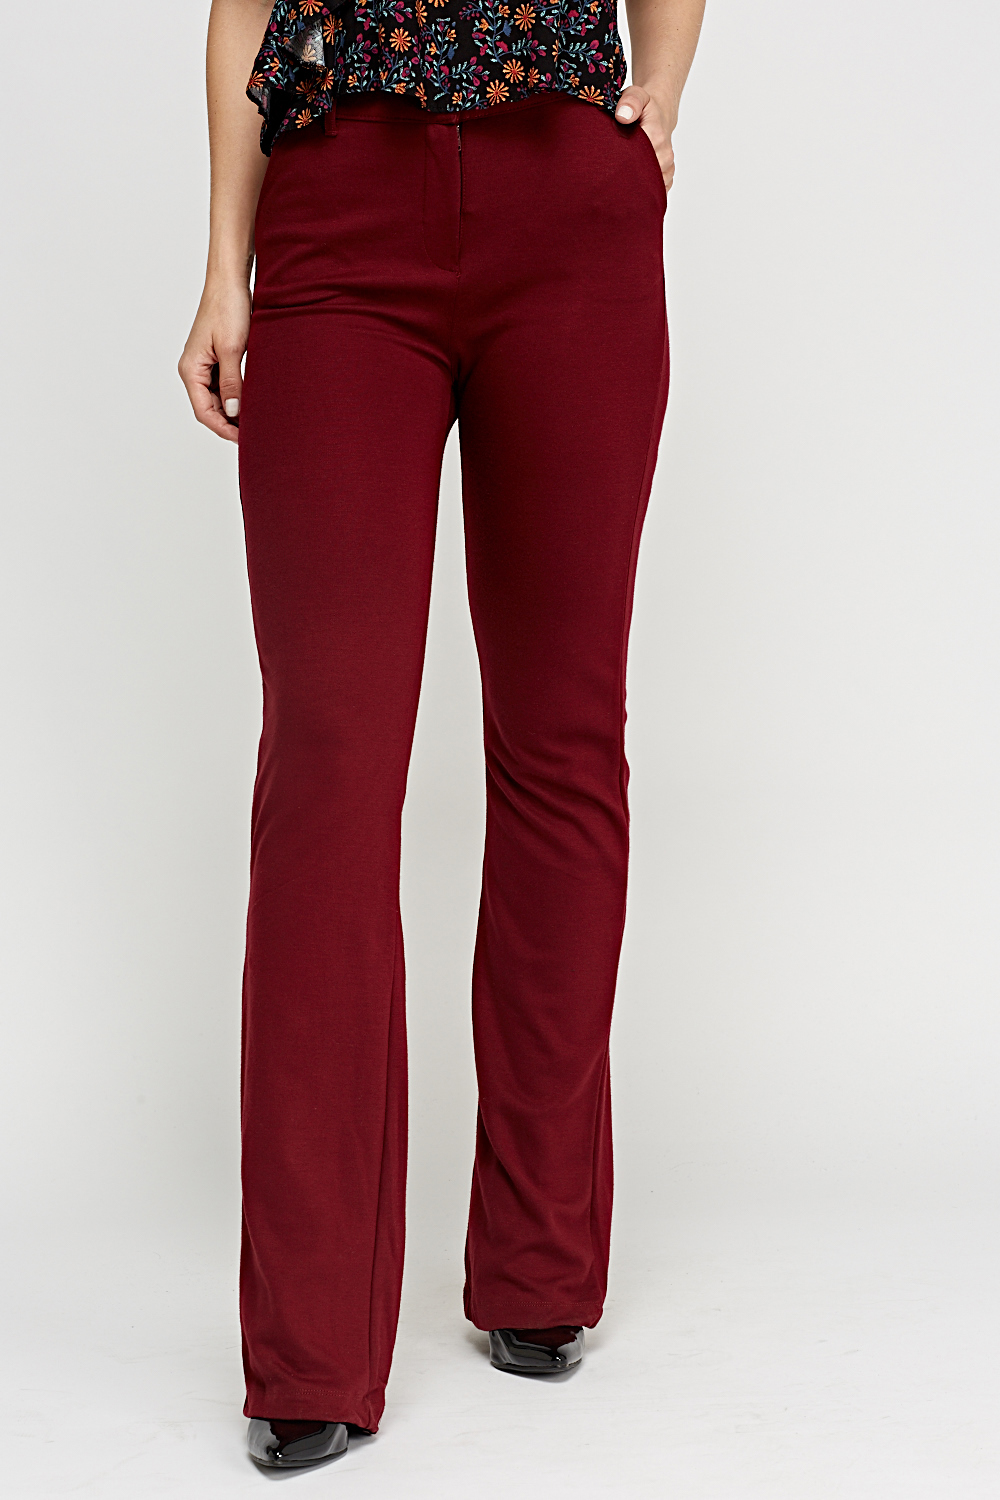 Flared Leg Wine Trousers - Just $3